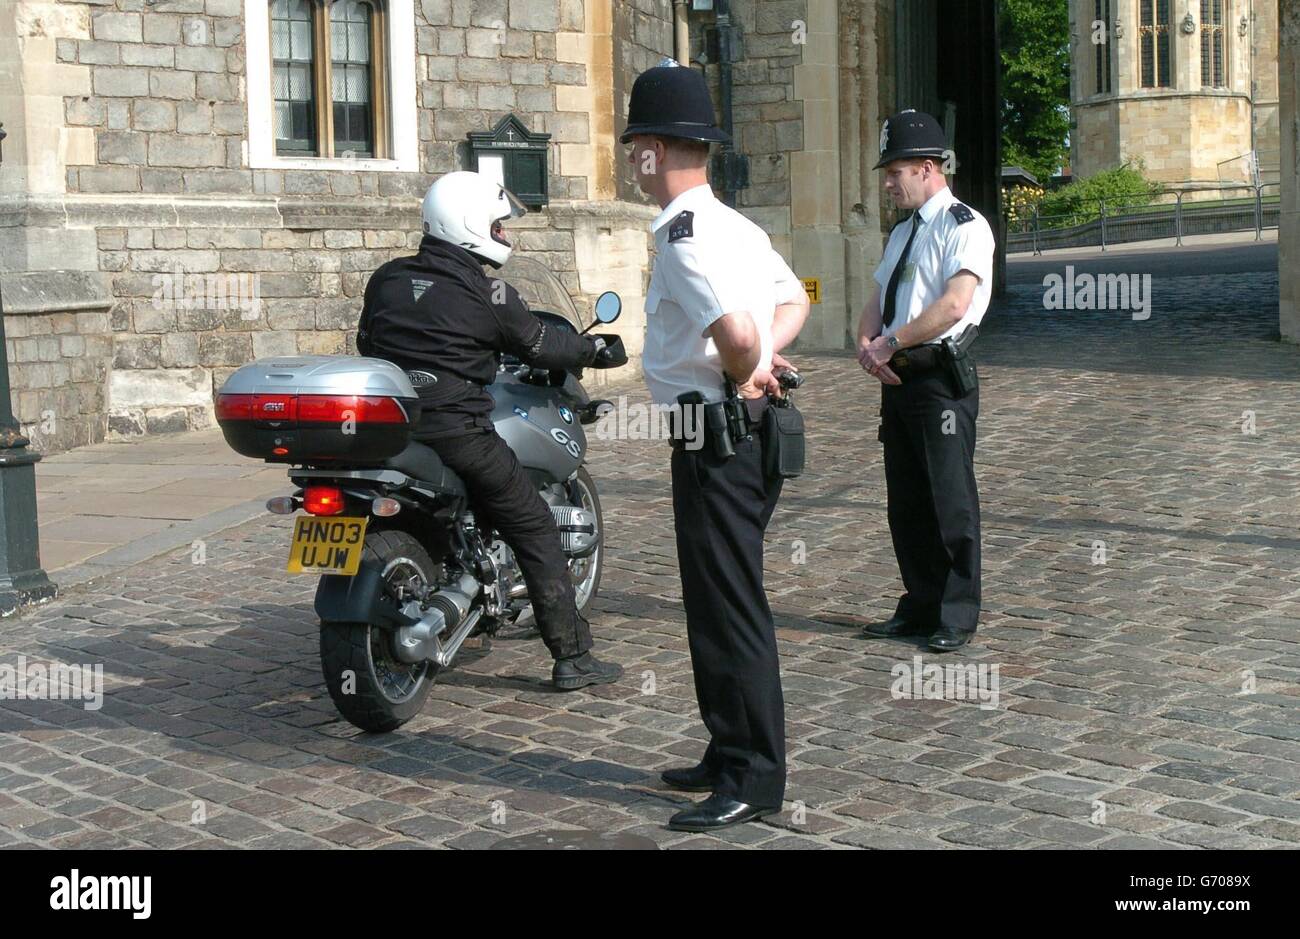 Police officers check a motorcyclist entering the Henry VIII gate at Windsor Castle. A man arrested at the castle on suspicion of impersonating a police officer was still being questioned along with his girlfriend at a London police station. The castle is frequently home to member of the Royal family. Stock Photo